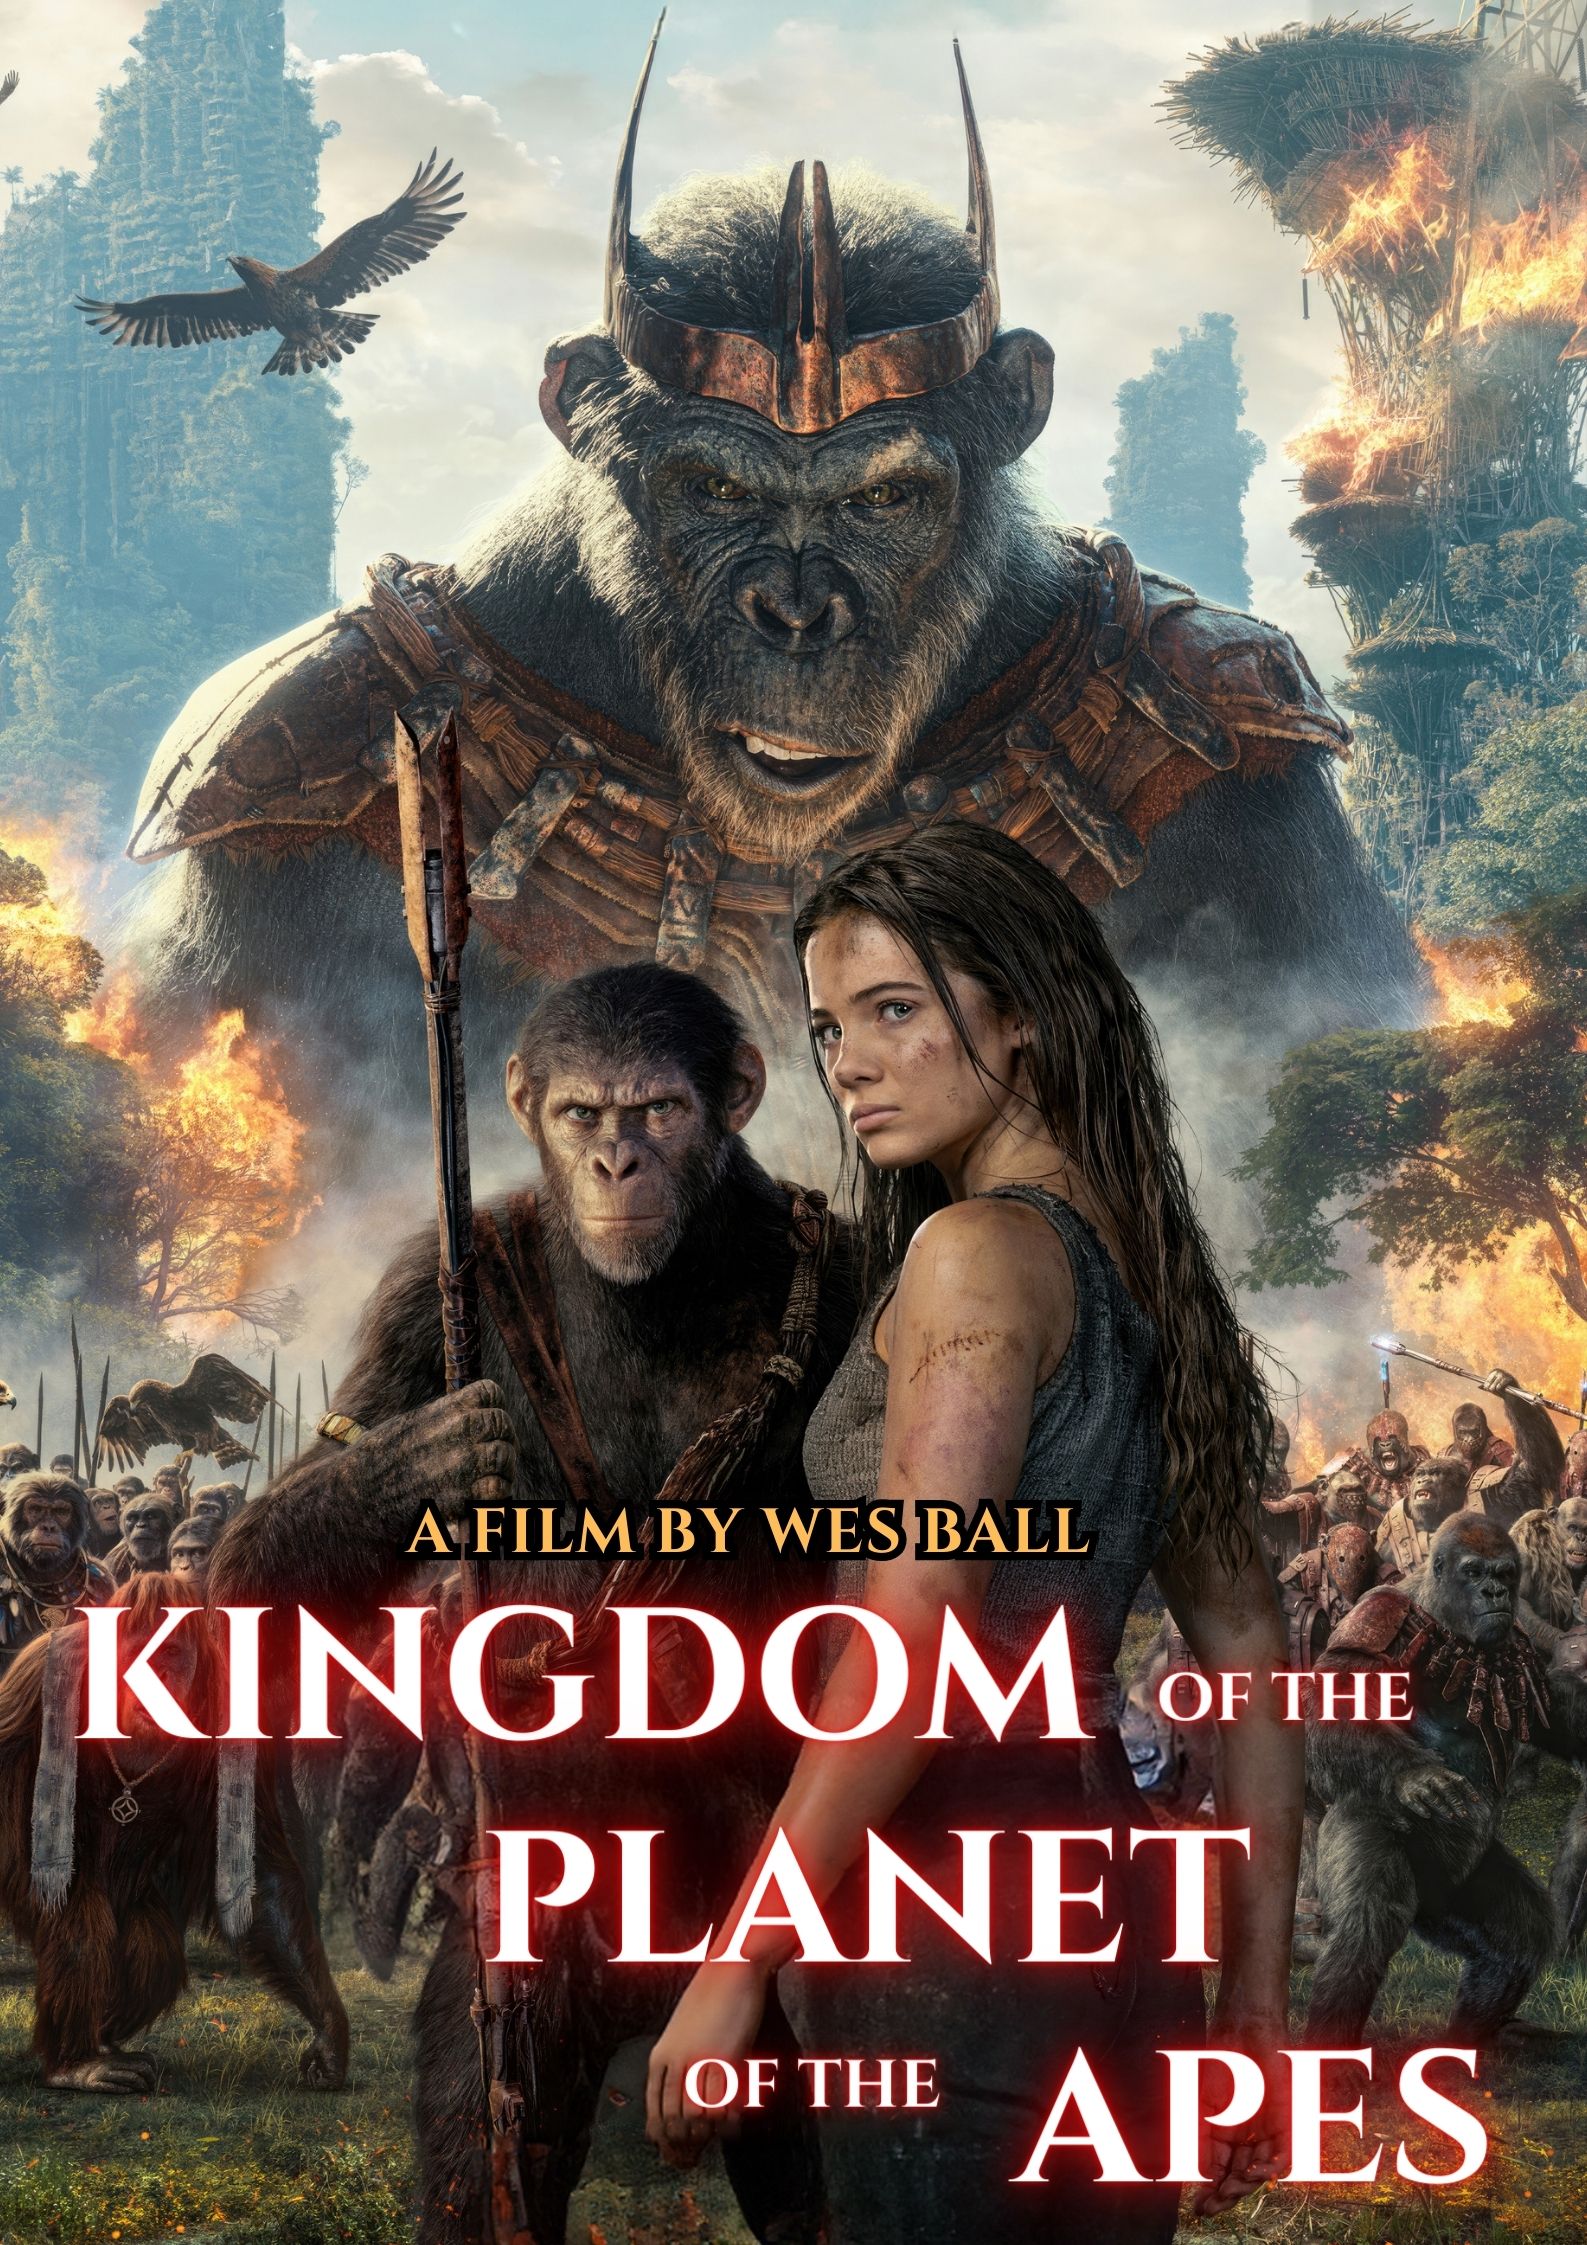 Kingdom of the Planet of the Apes poSTER